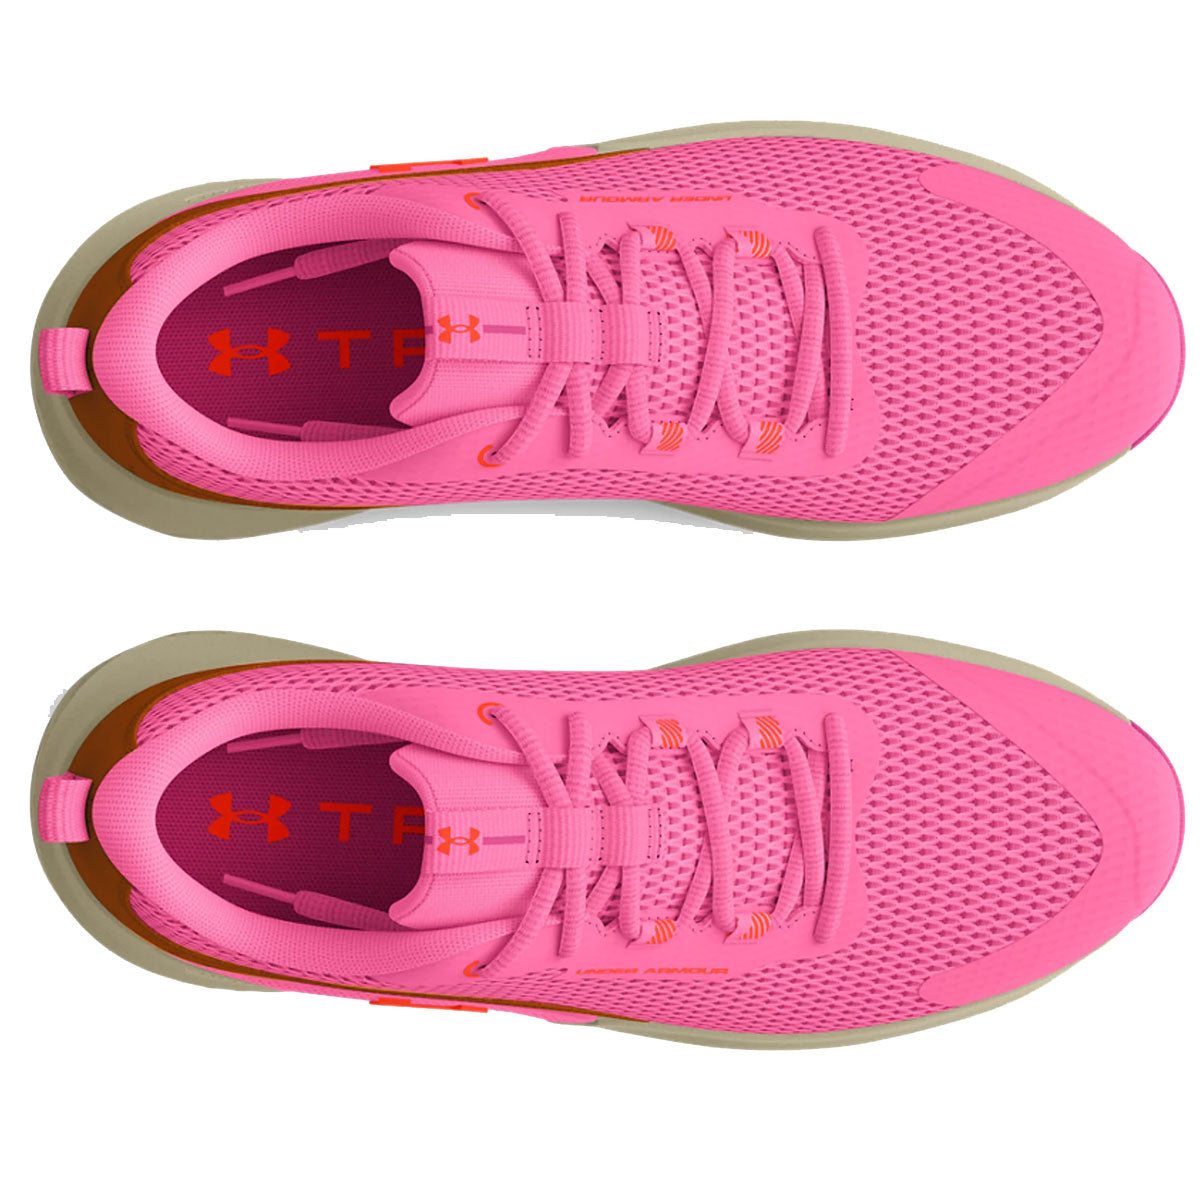 Under Armour Dynamic Select Training Shoes - Womens - Pink/Copper Penny/Phoenix Fire